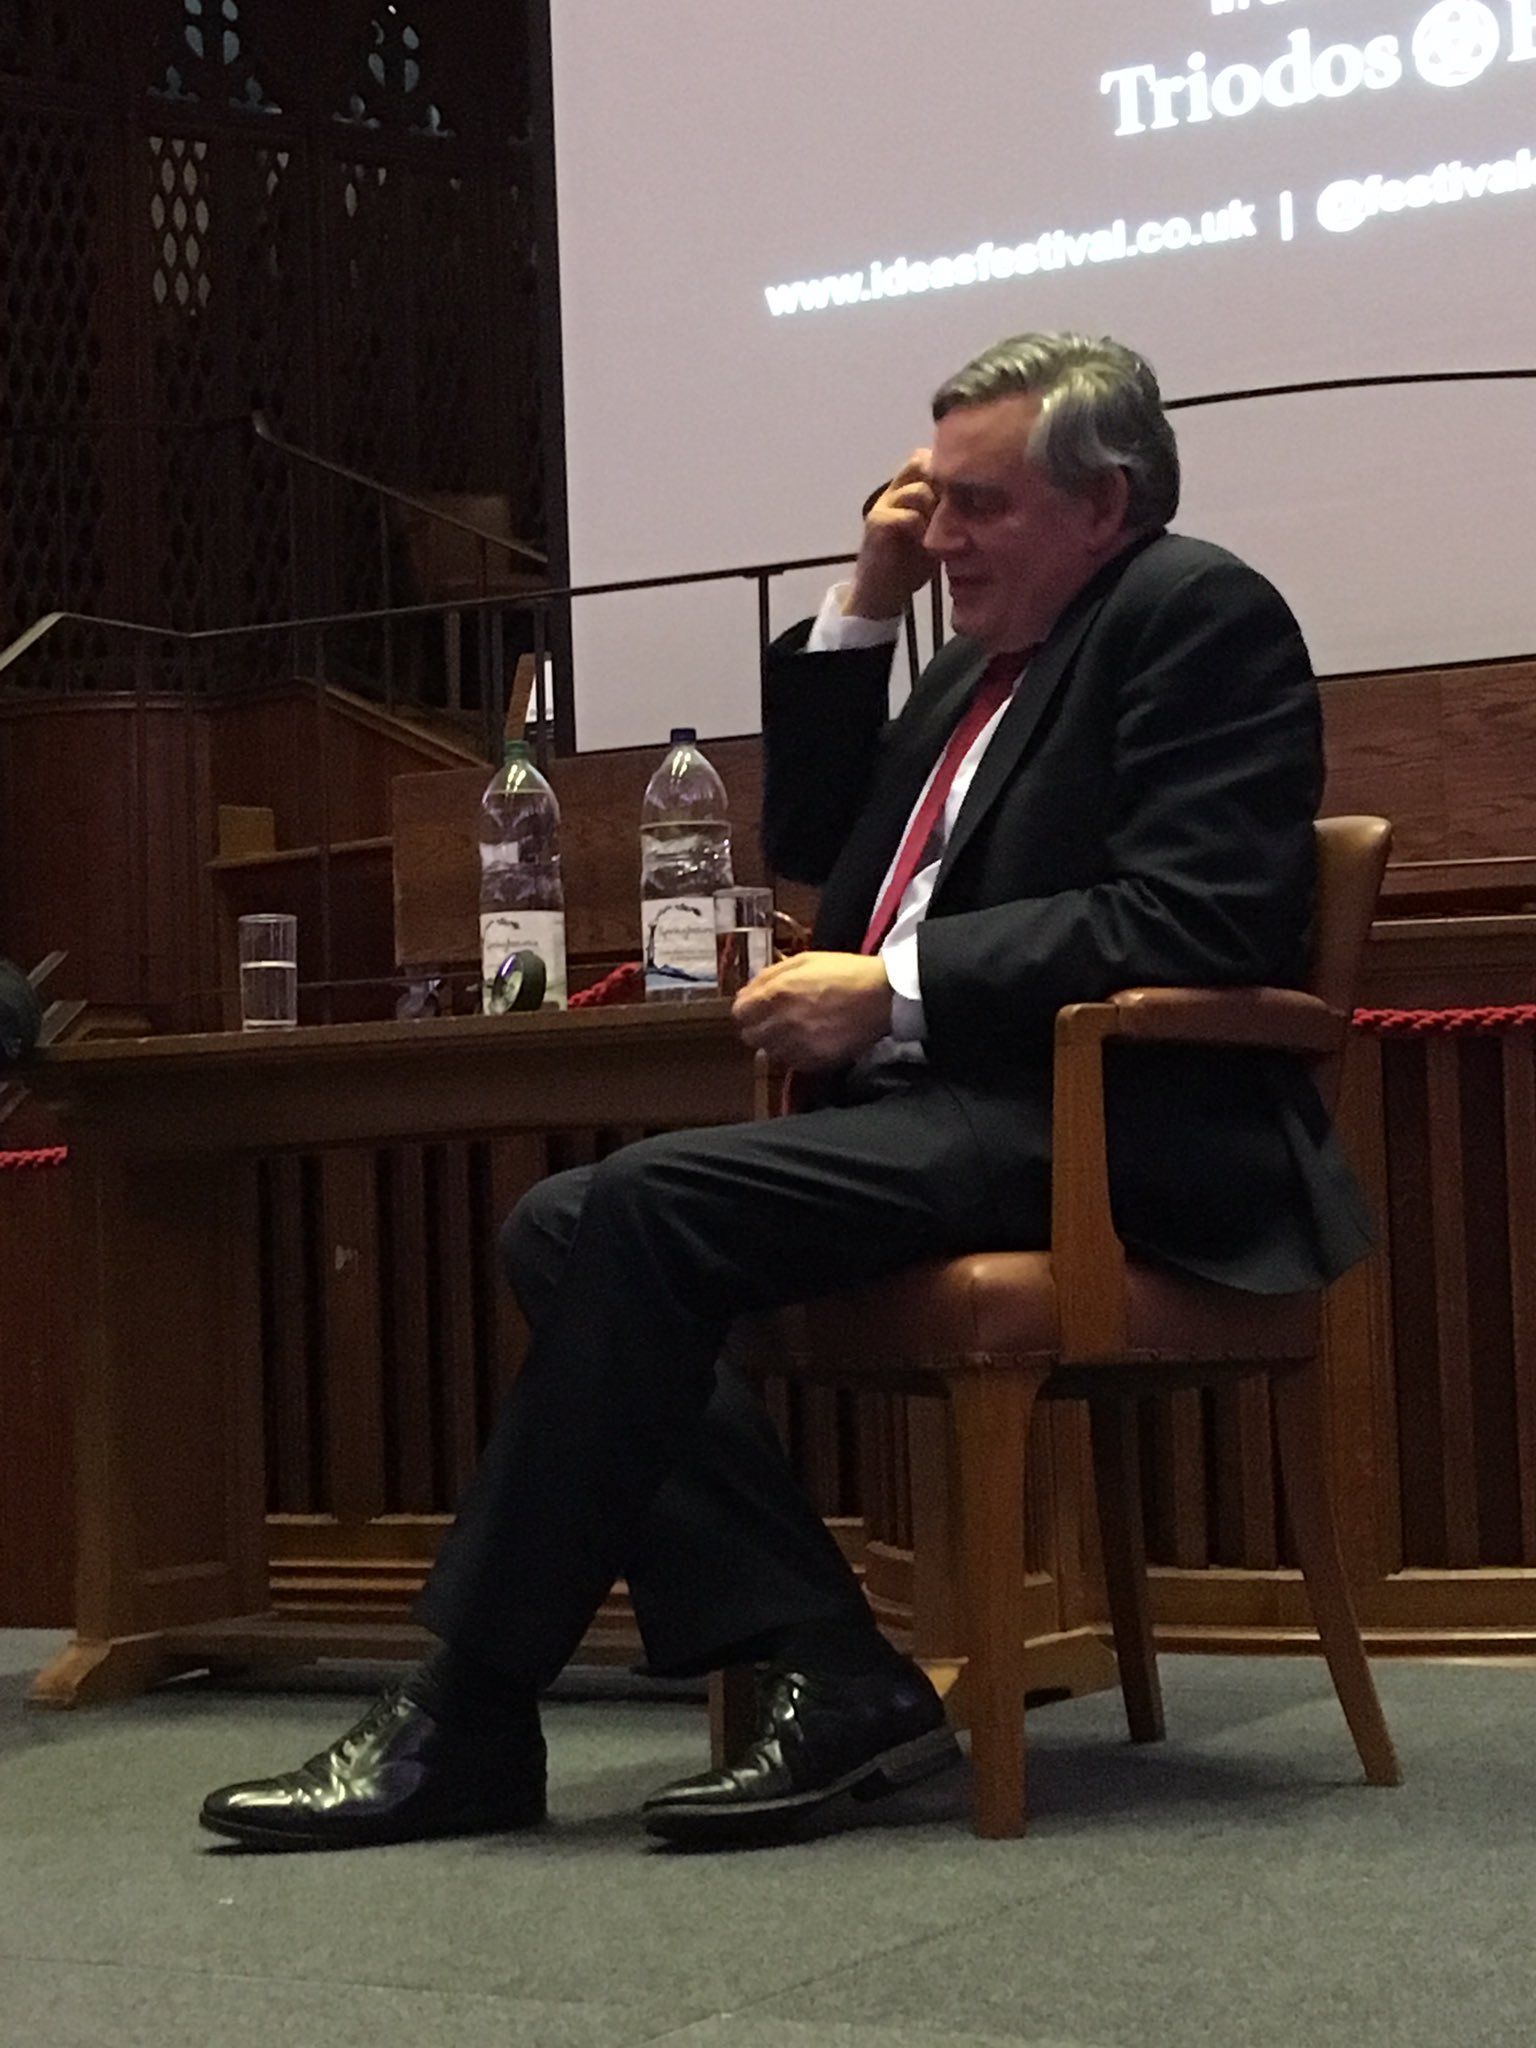 Honoured to have heard Gordon Brown speak at #economicsfest @FestivalofIdeas #Bristol Tuesday. The politician I've admired most, for his intellect & the social values that underpinned his policies whilst in government. The country is poorer without him at the top. @OfficeGSBrown https://t.co/pQ0eH8NCrl